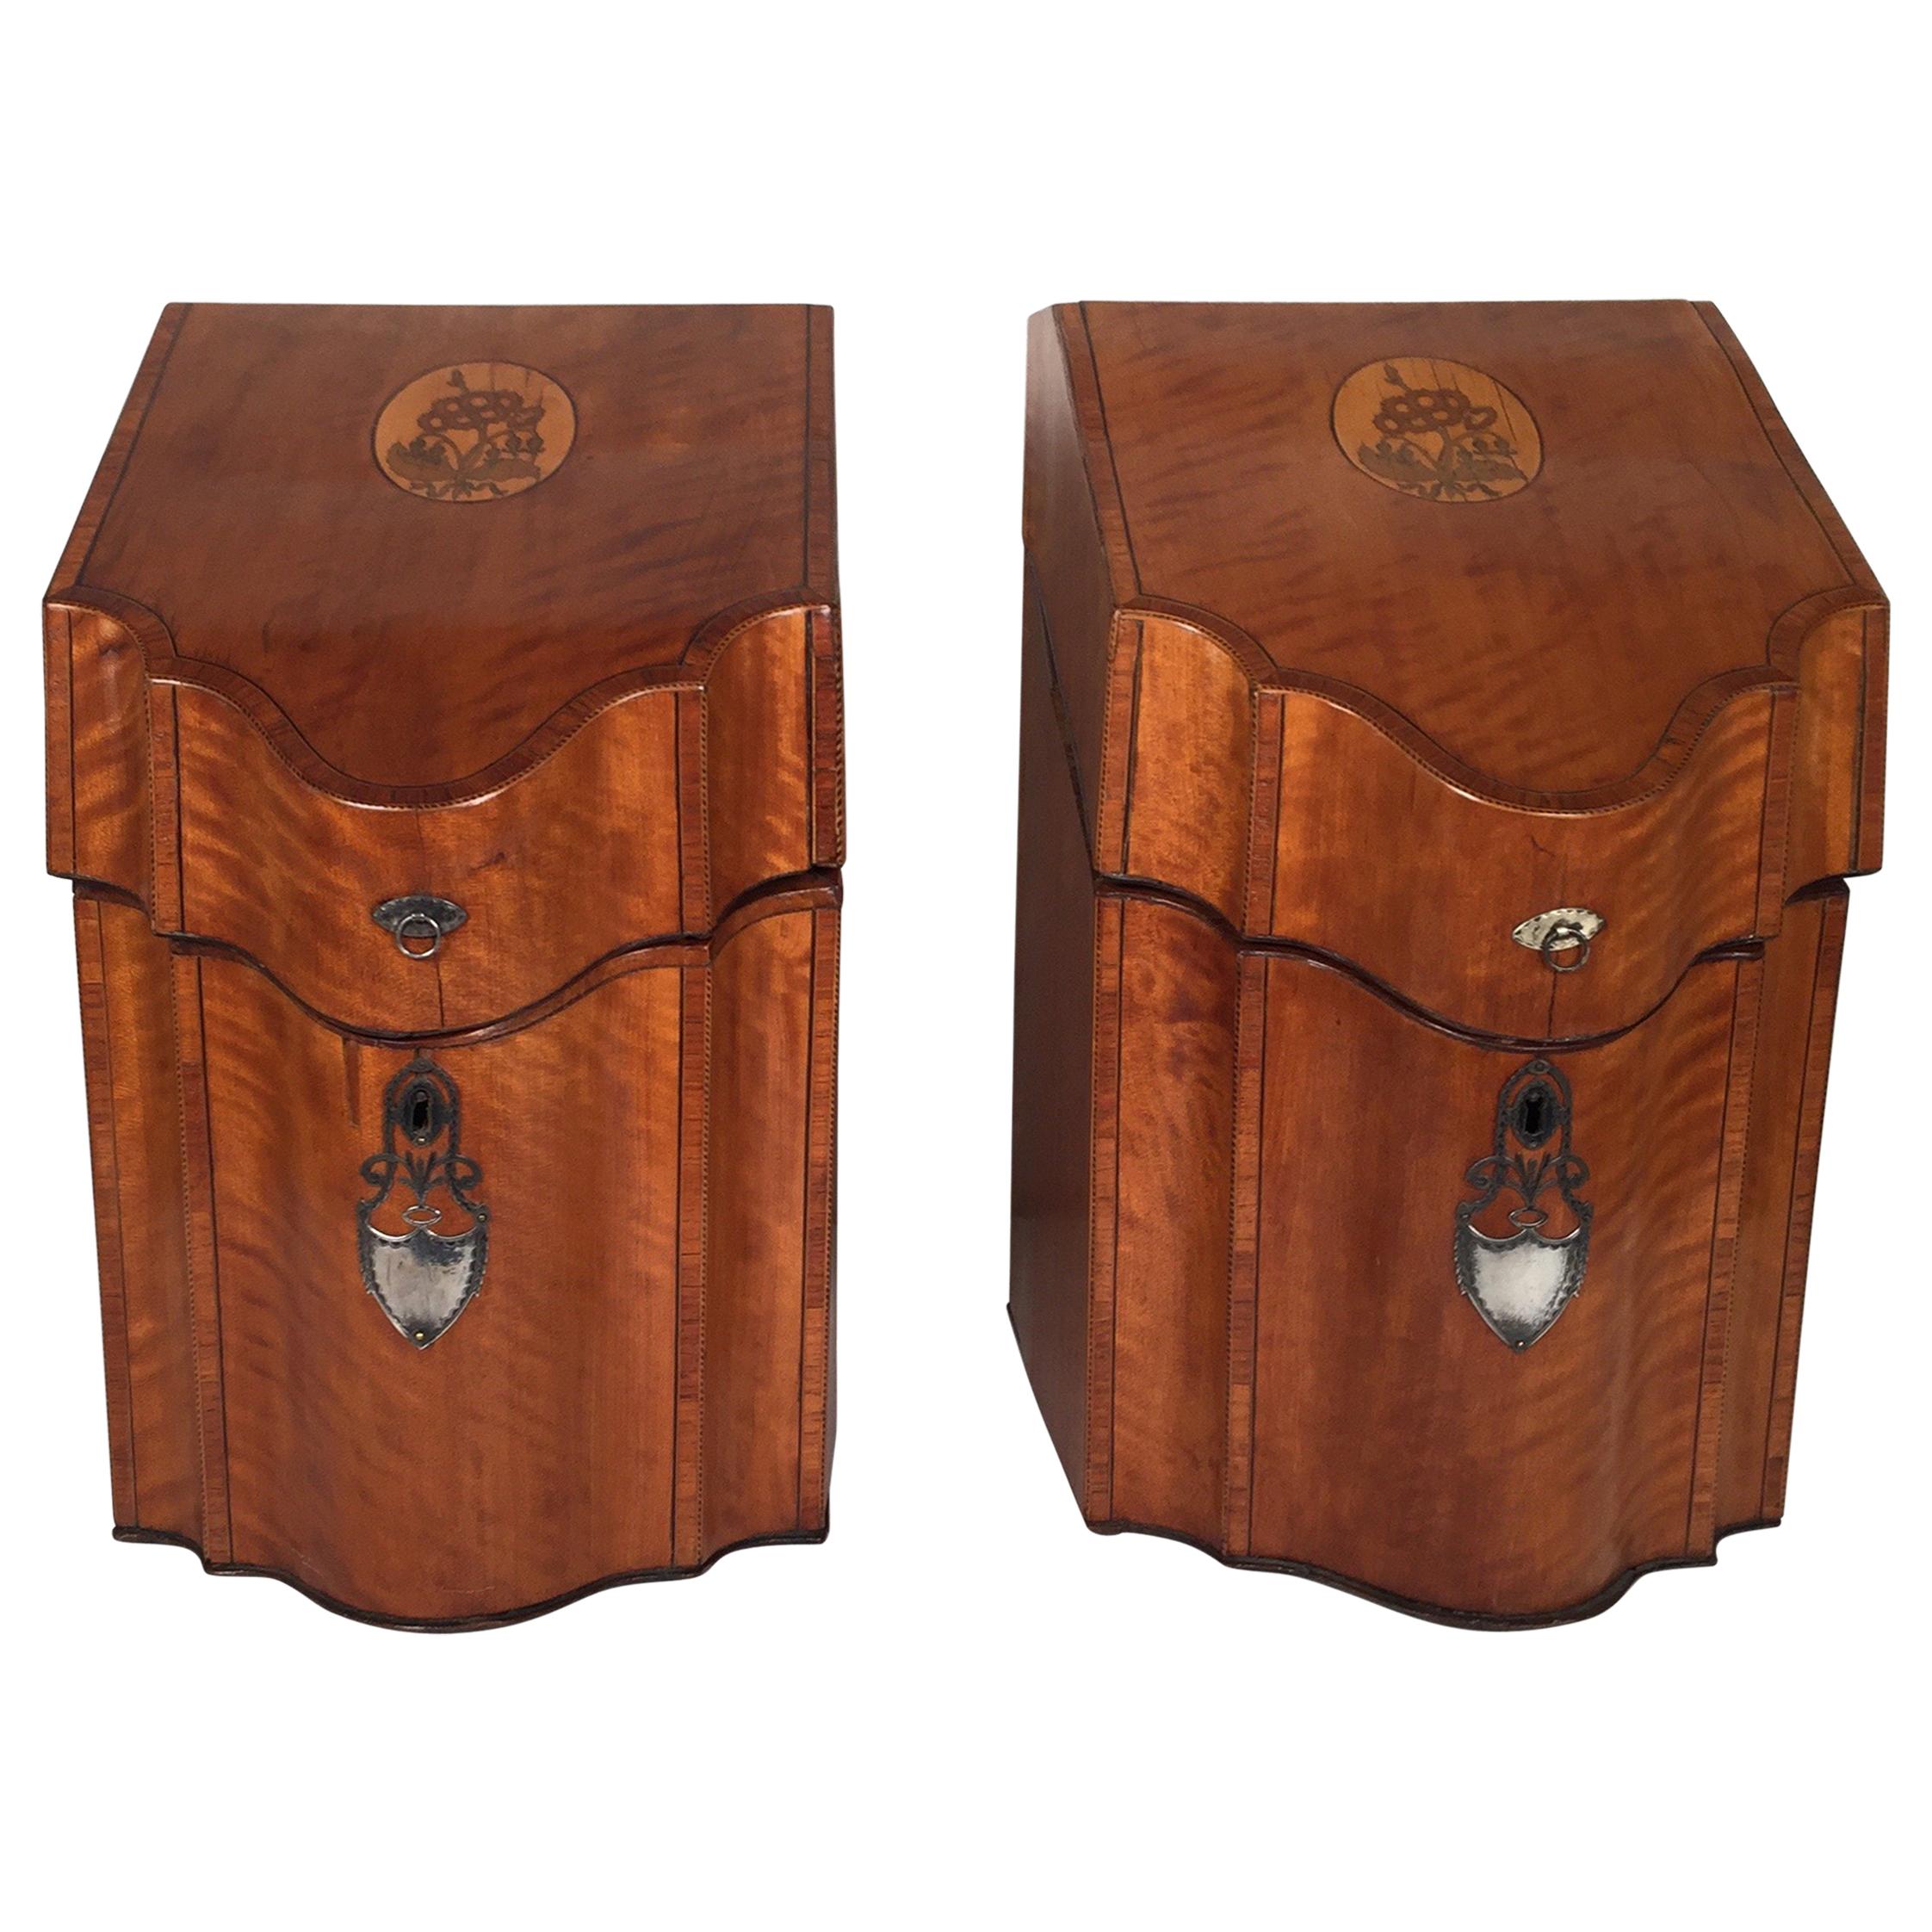 Superb Pair of English Inlaid Satinwood Cutlery Boxes